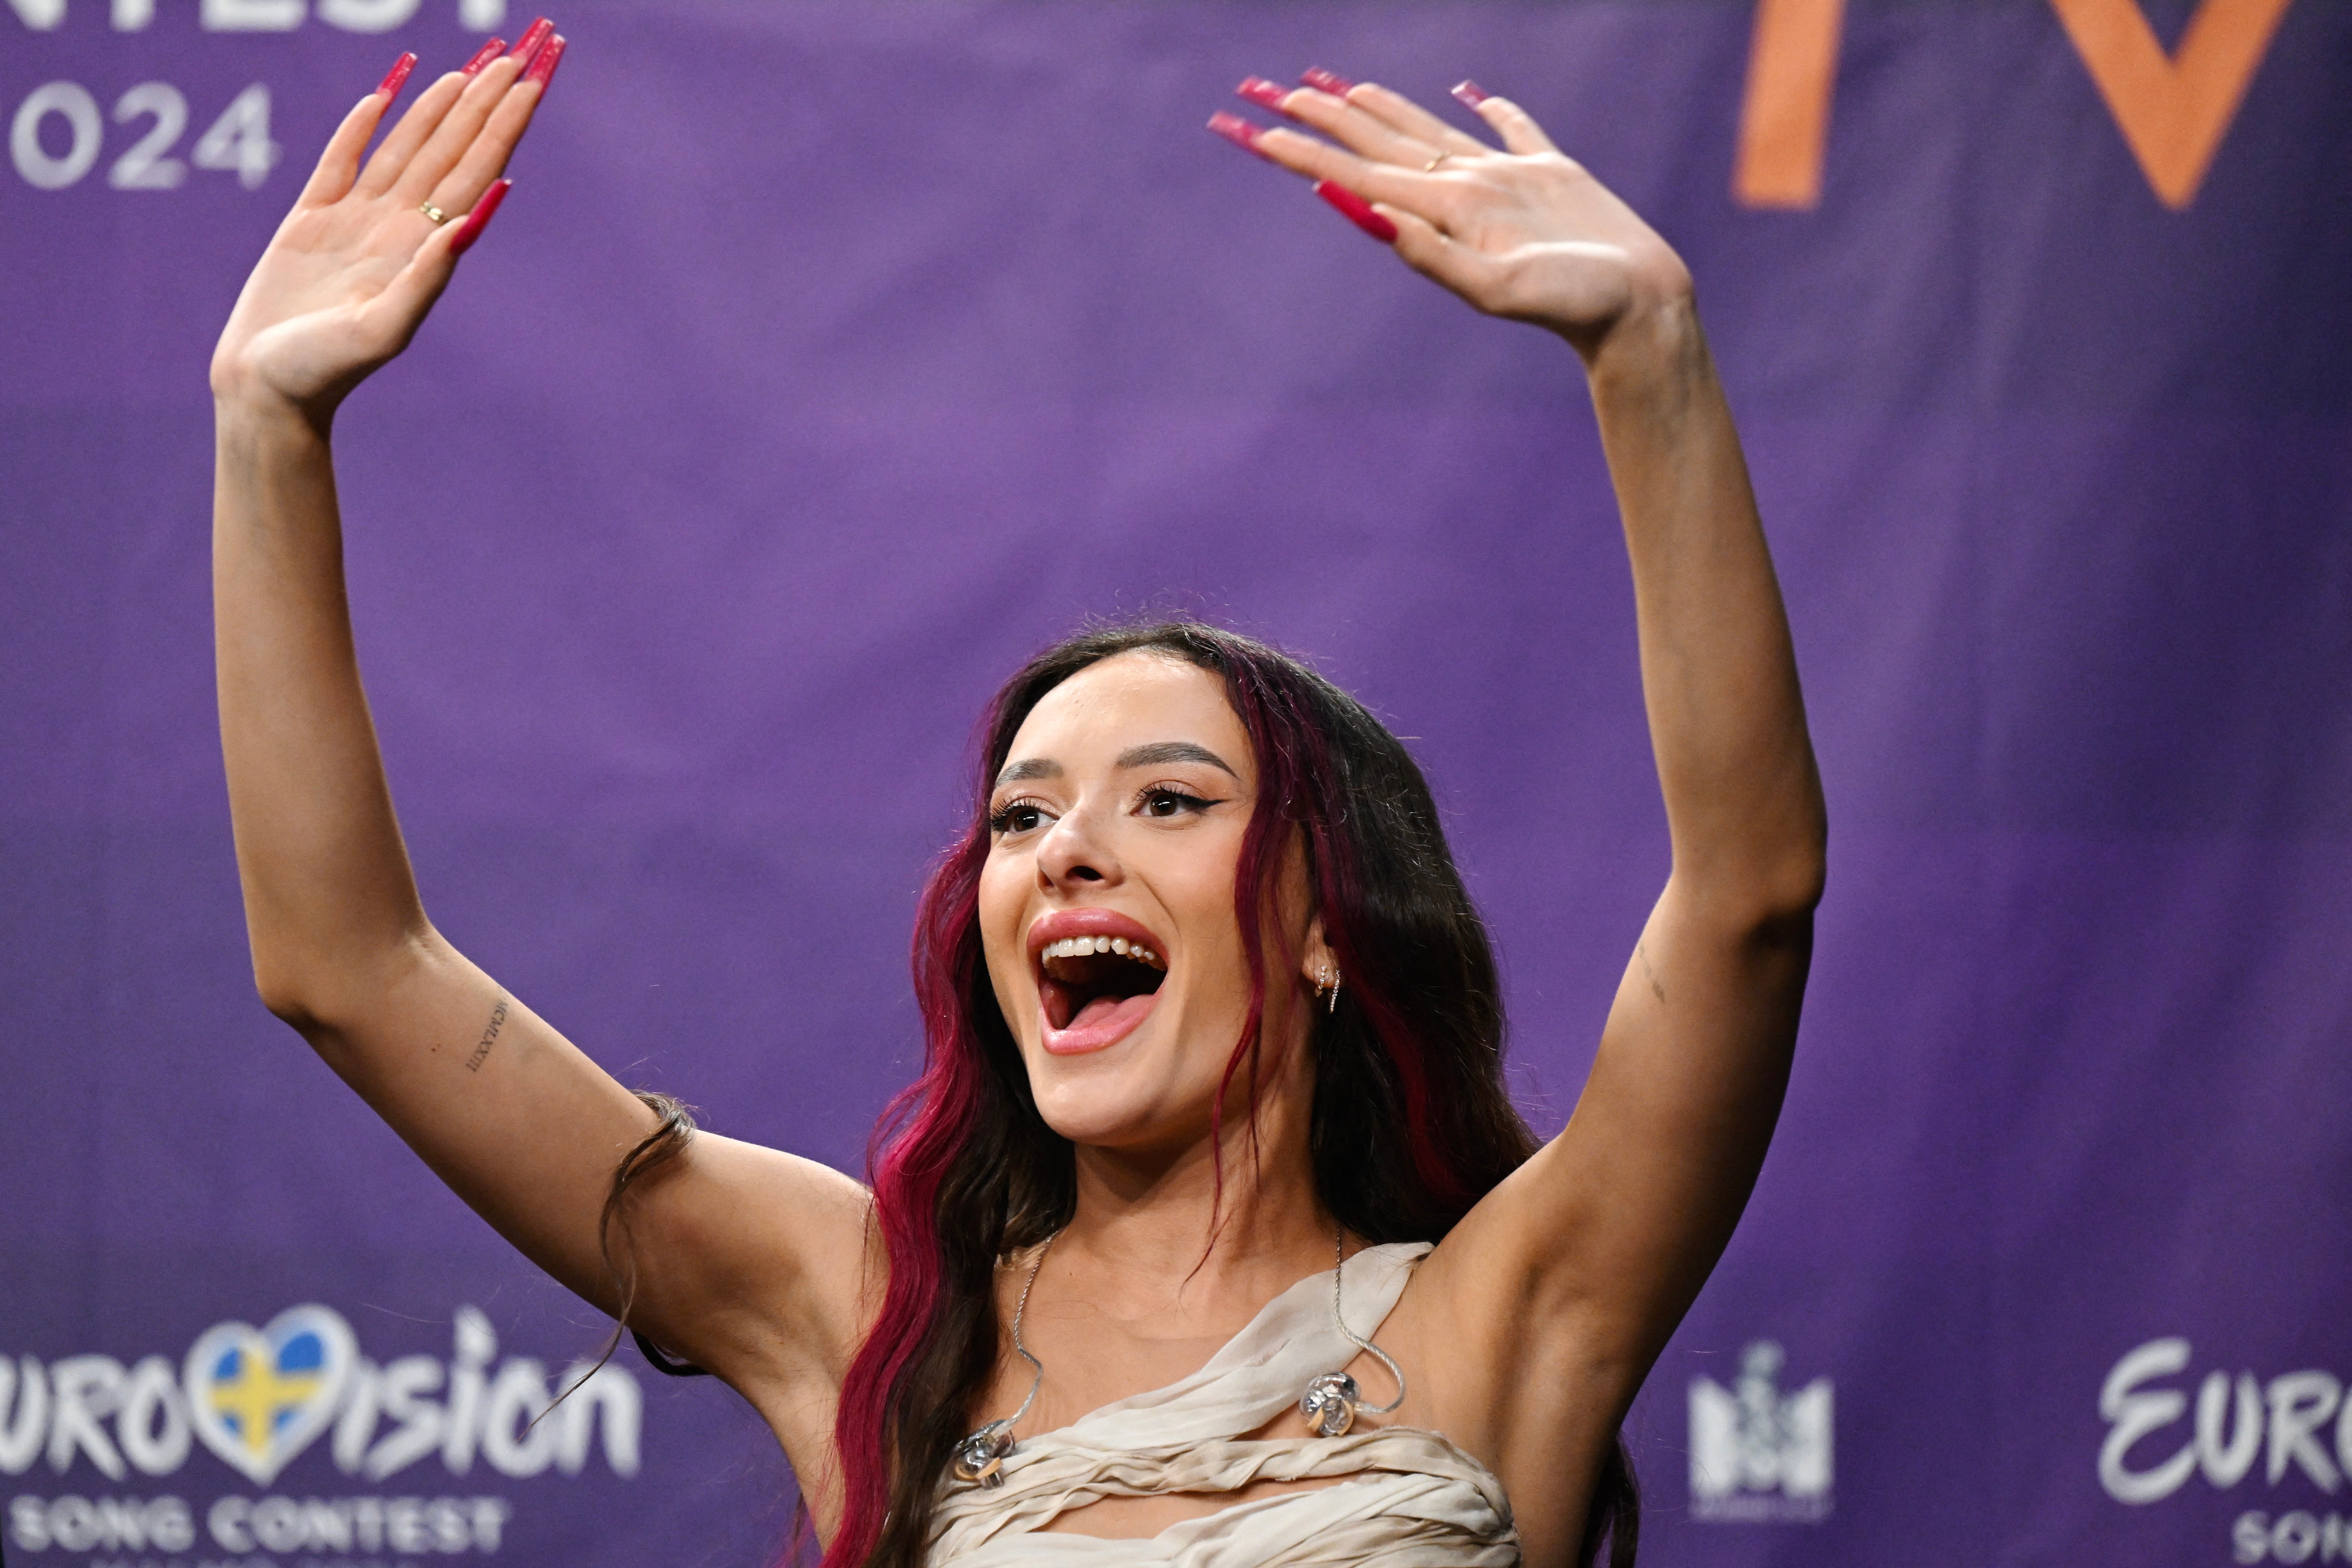 Israel’s Eden Golan reacts after qualifying for the final of the 2024 Eurovision Song Contest